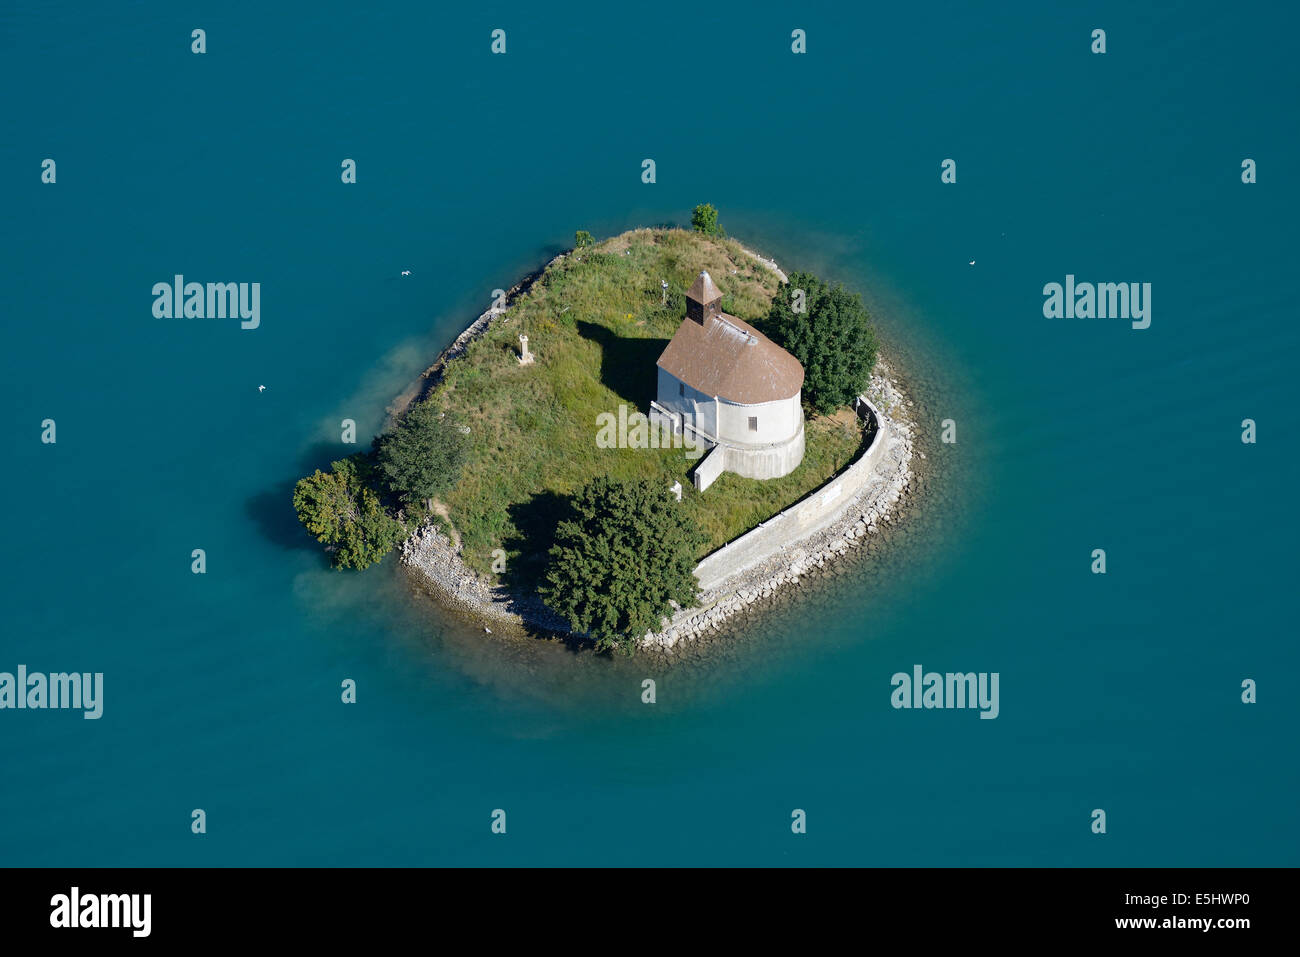 AERIAL VIEW. Chapel on an island surrounded by turquoise waters. Saint-Michel island, Chorges, Lake Serre-Ponçon, Hautes-Alpes, France. Stock Photo